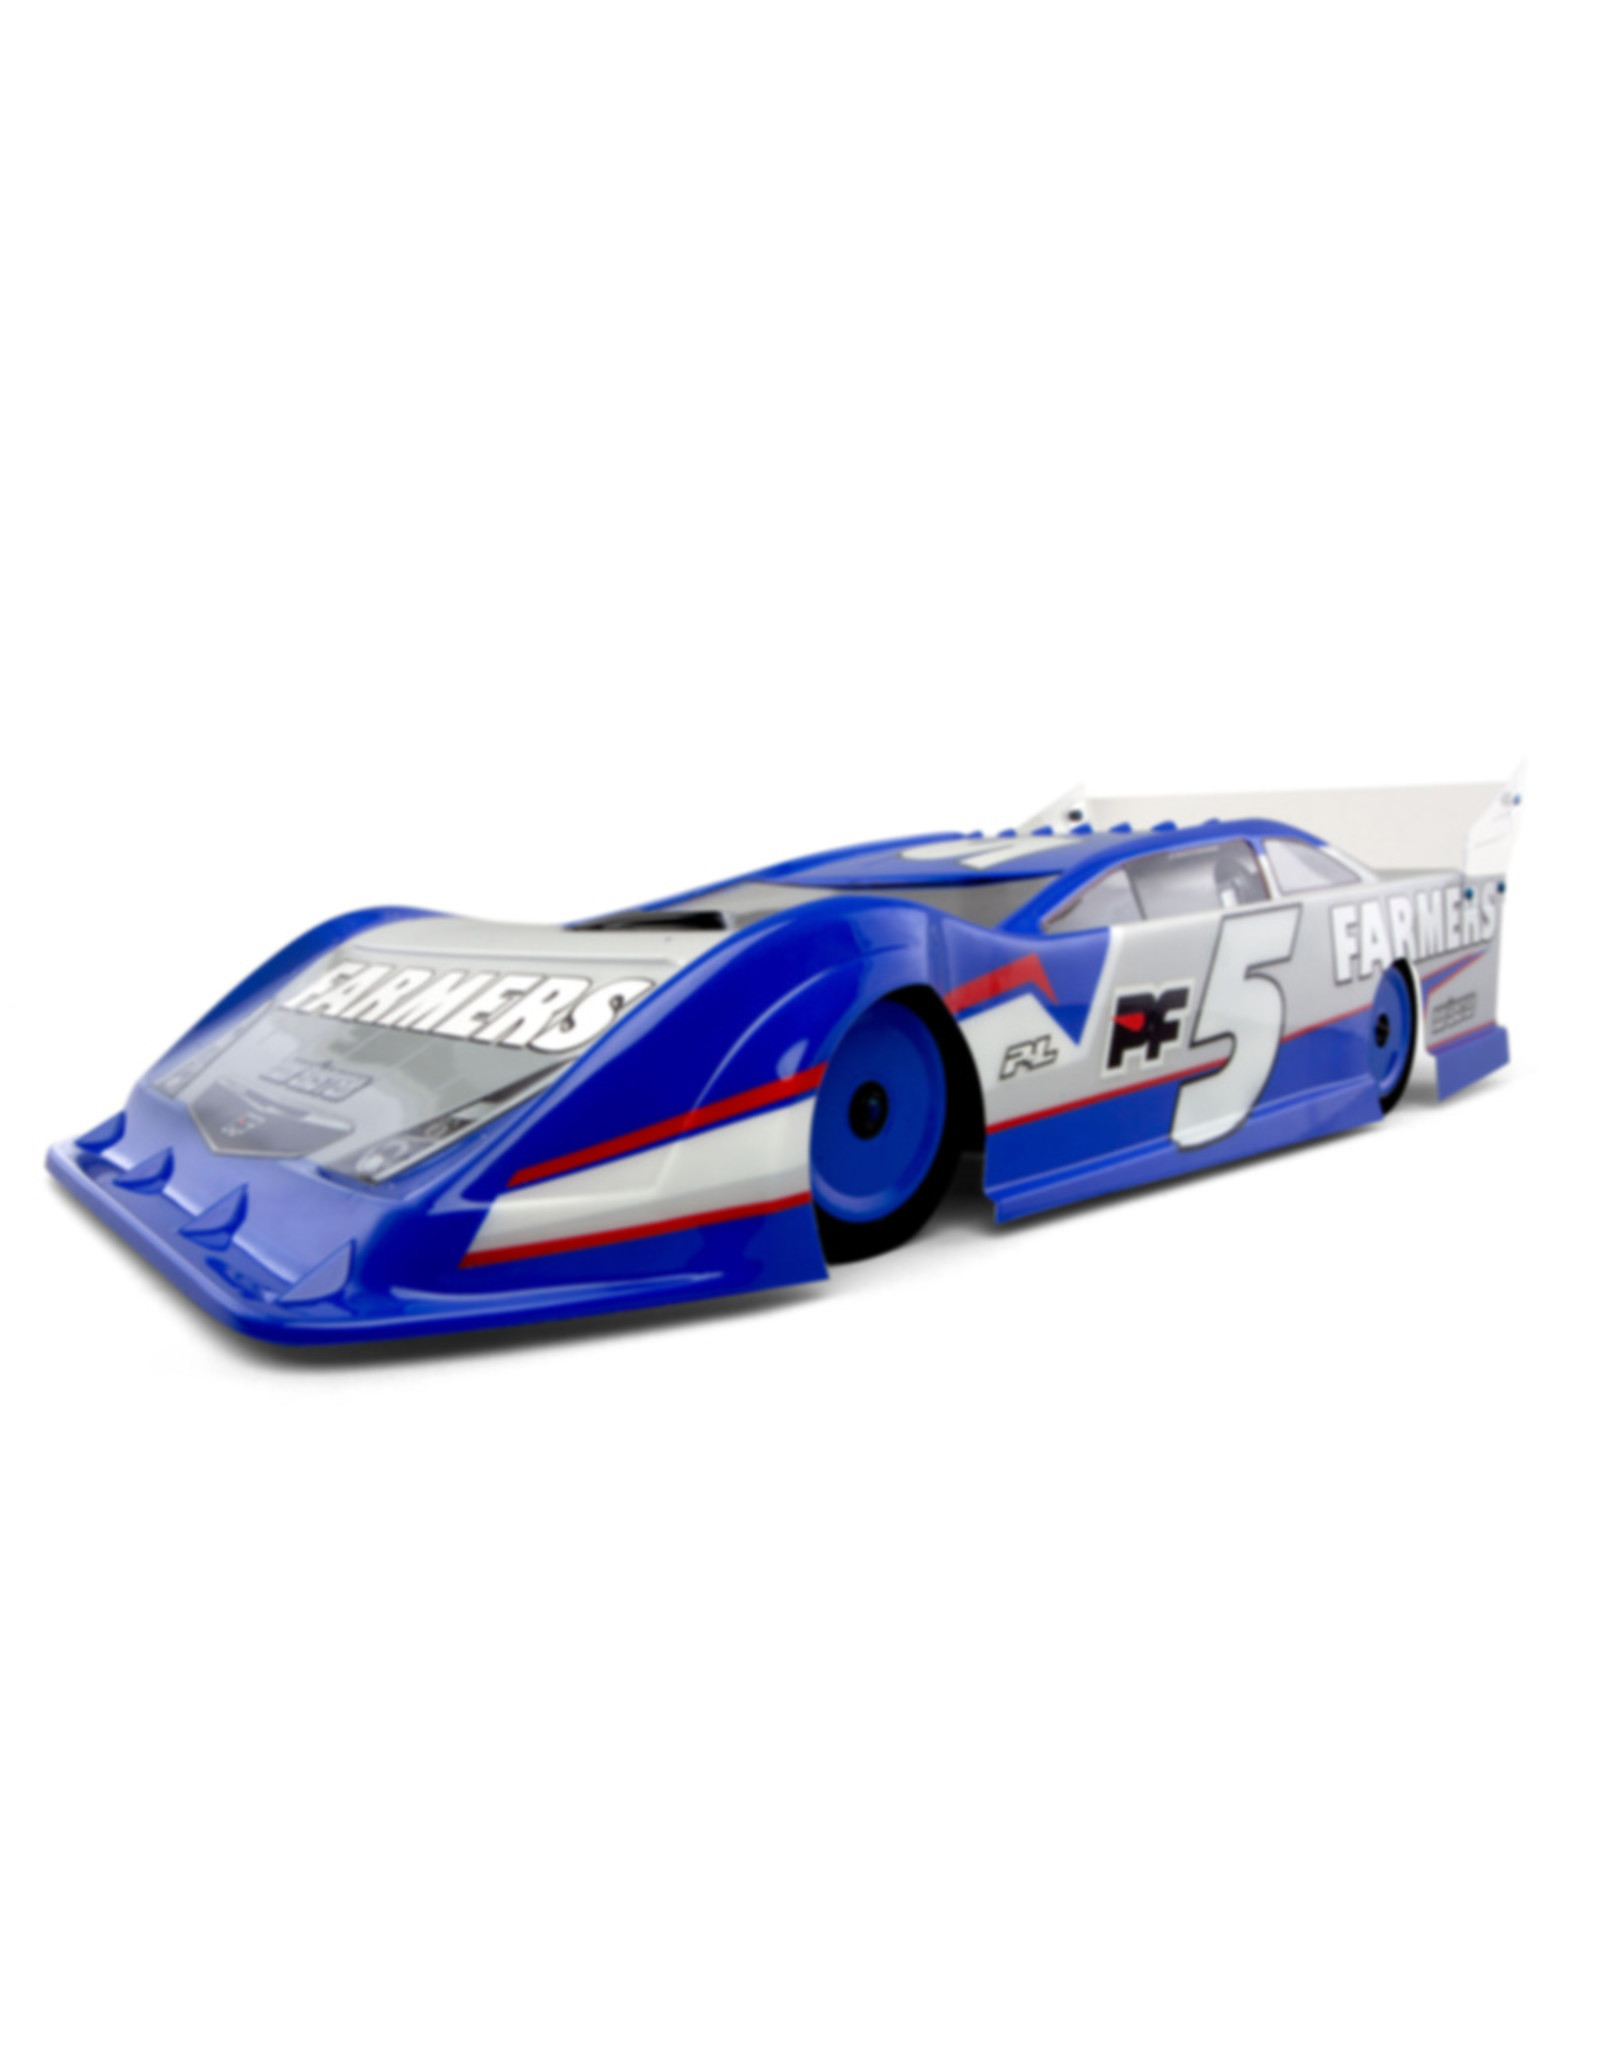 Pro-Line Racing PRM123830 Nor'easter Clear Body : Dirt Oval Late Model